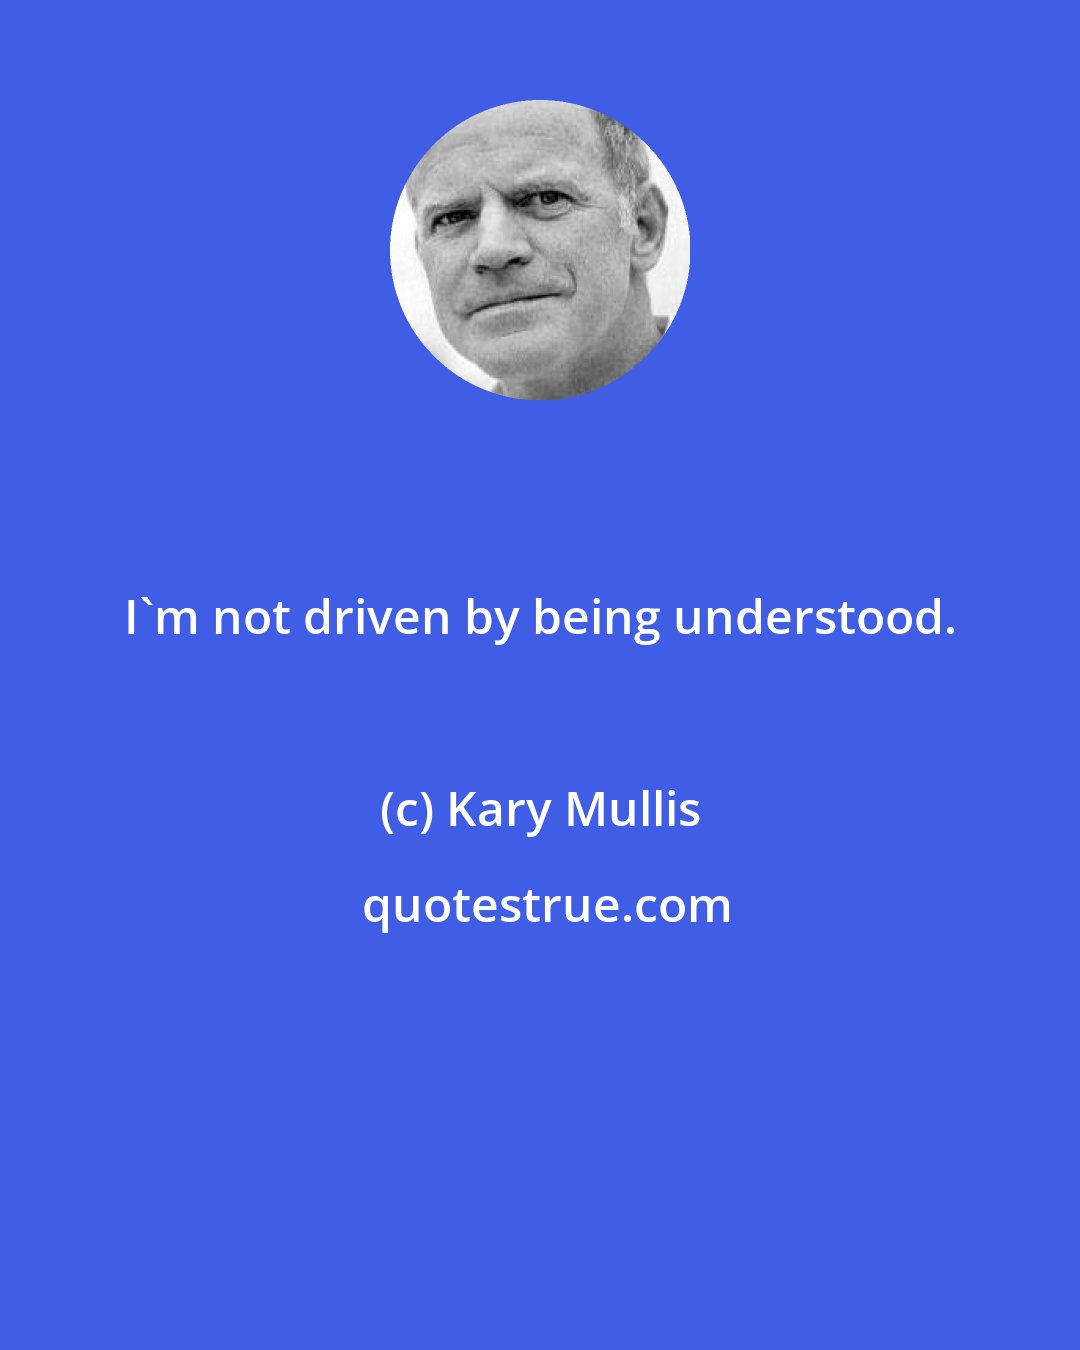 Kary Mullis: I'm not driven by being understood.